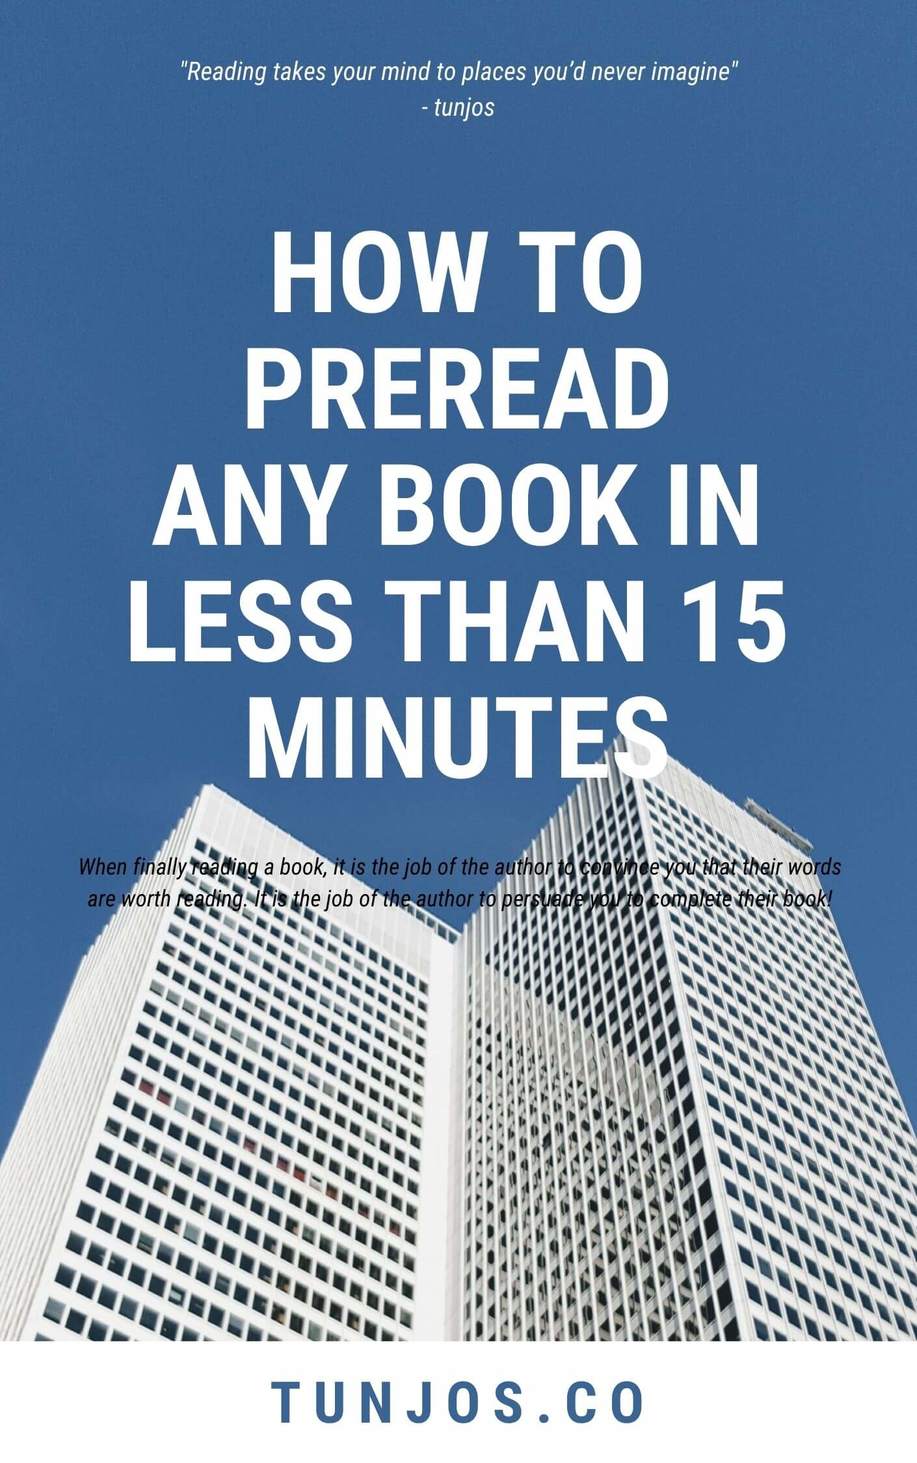 How to preread any Book in less than 15 minutes